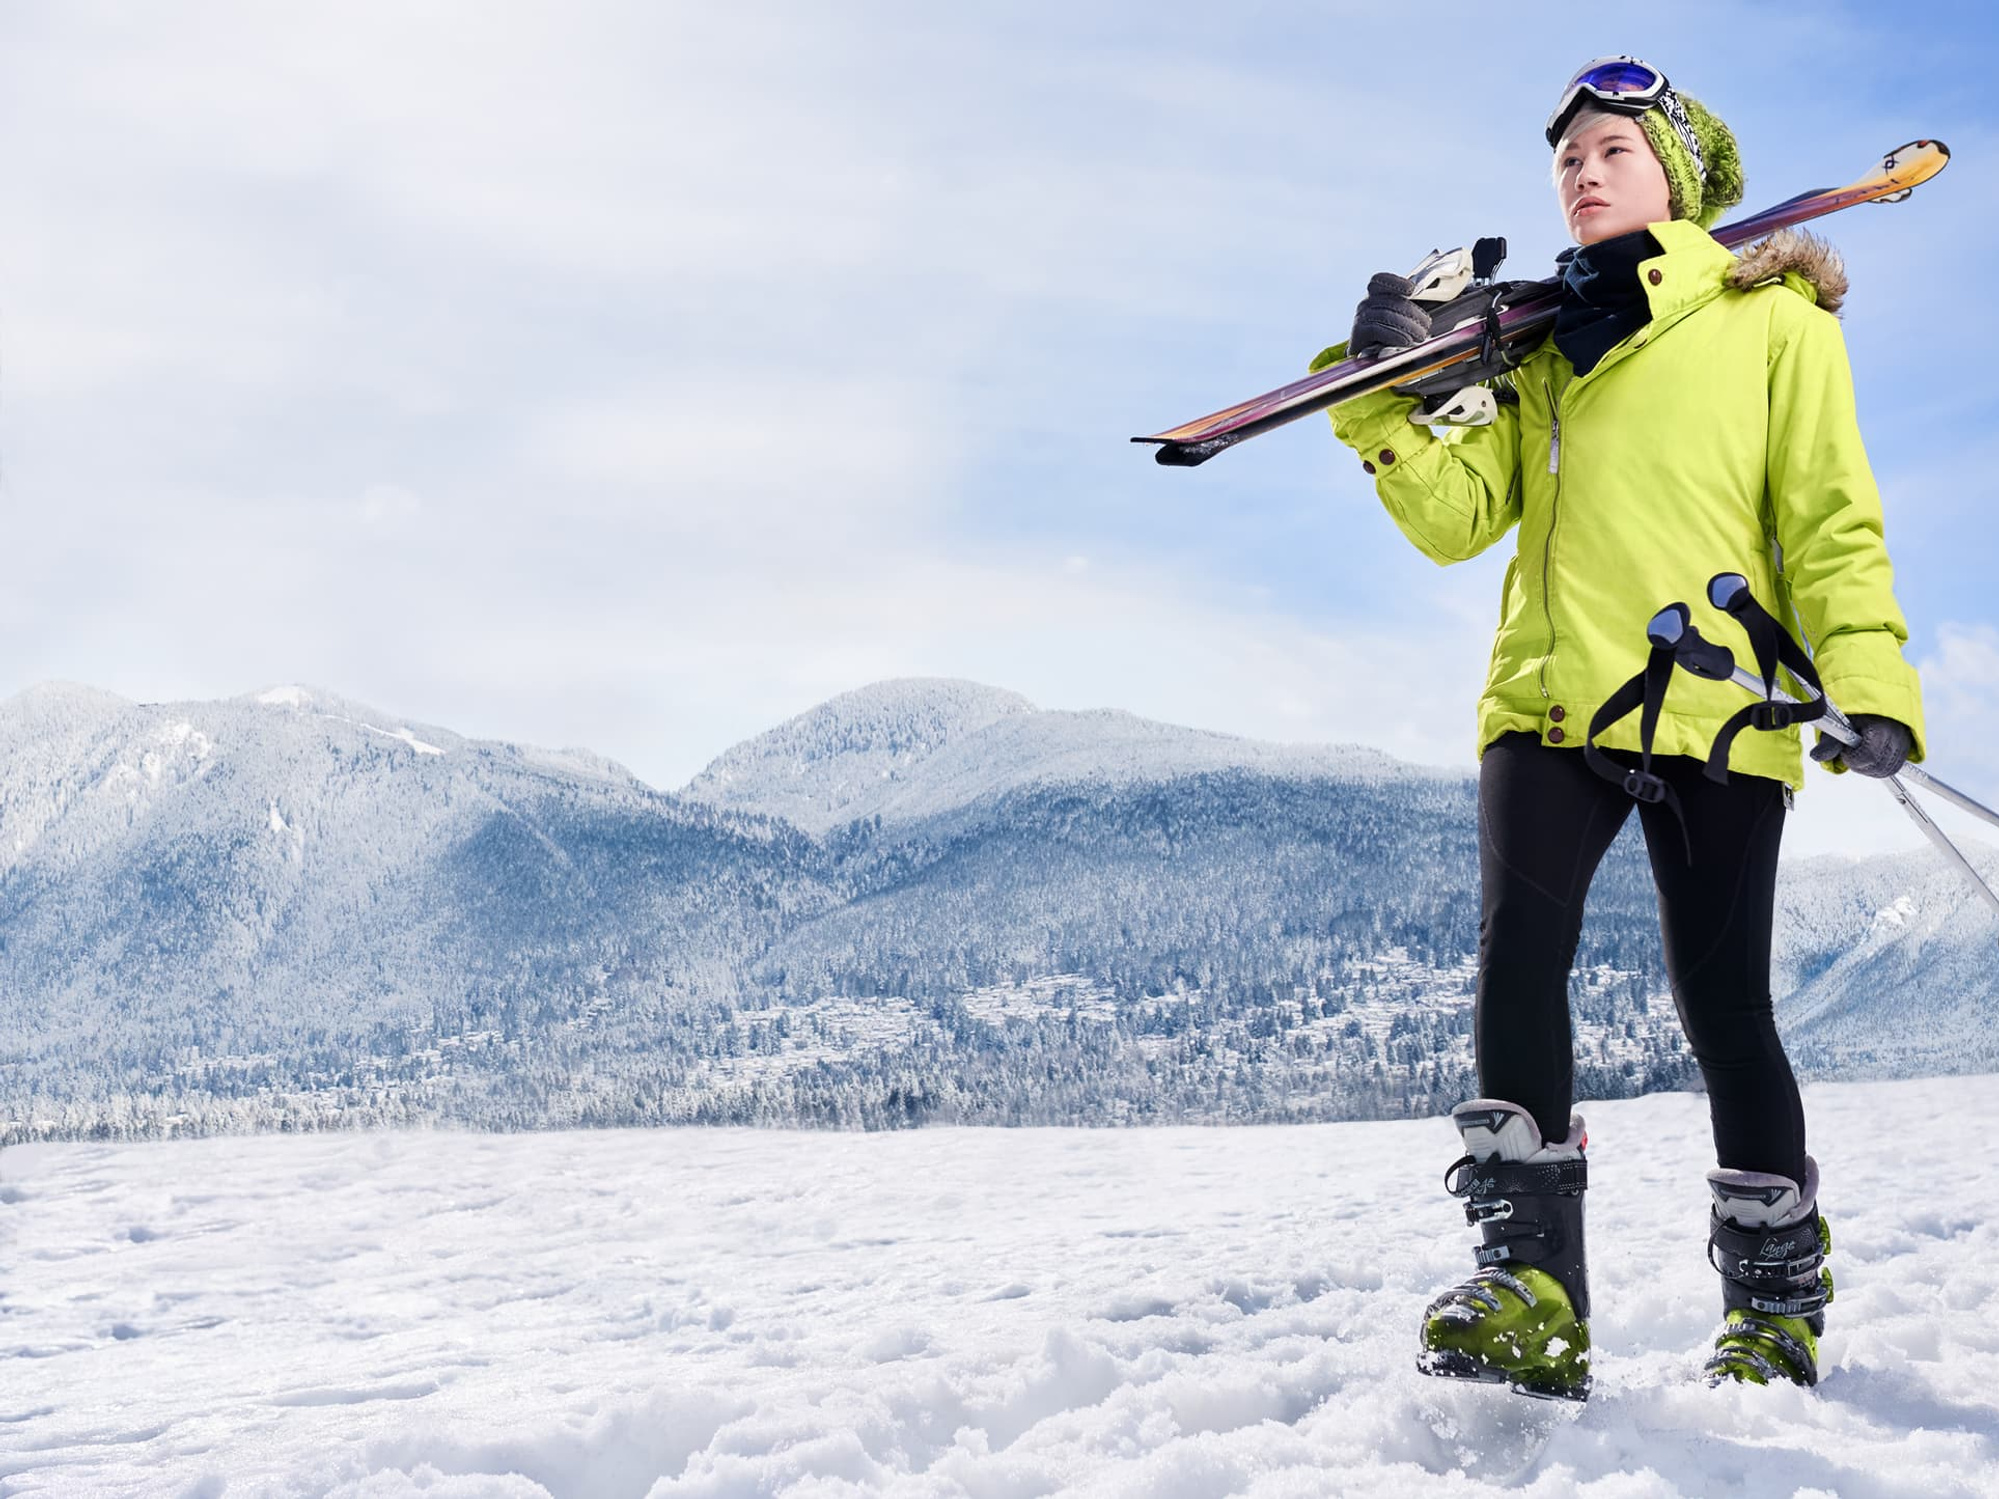 Woman in a snow suit holding skis walking behind a mountain range